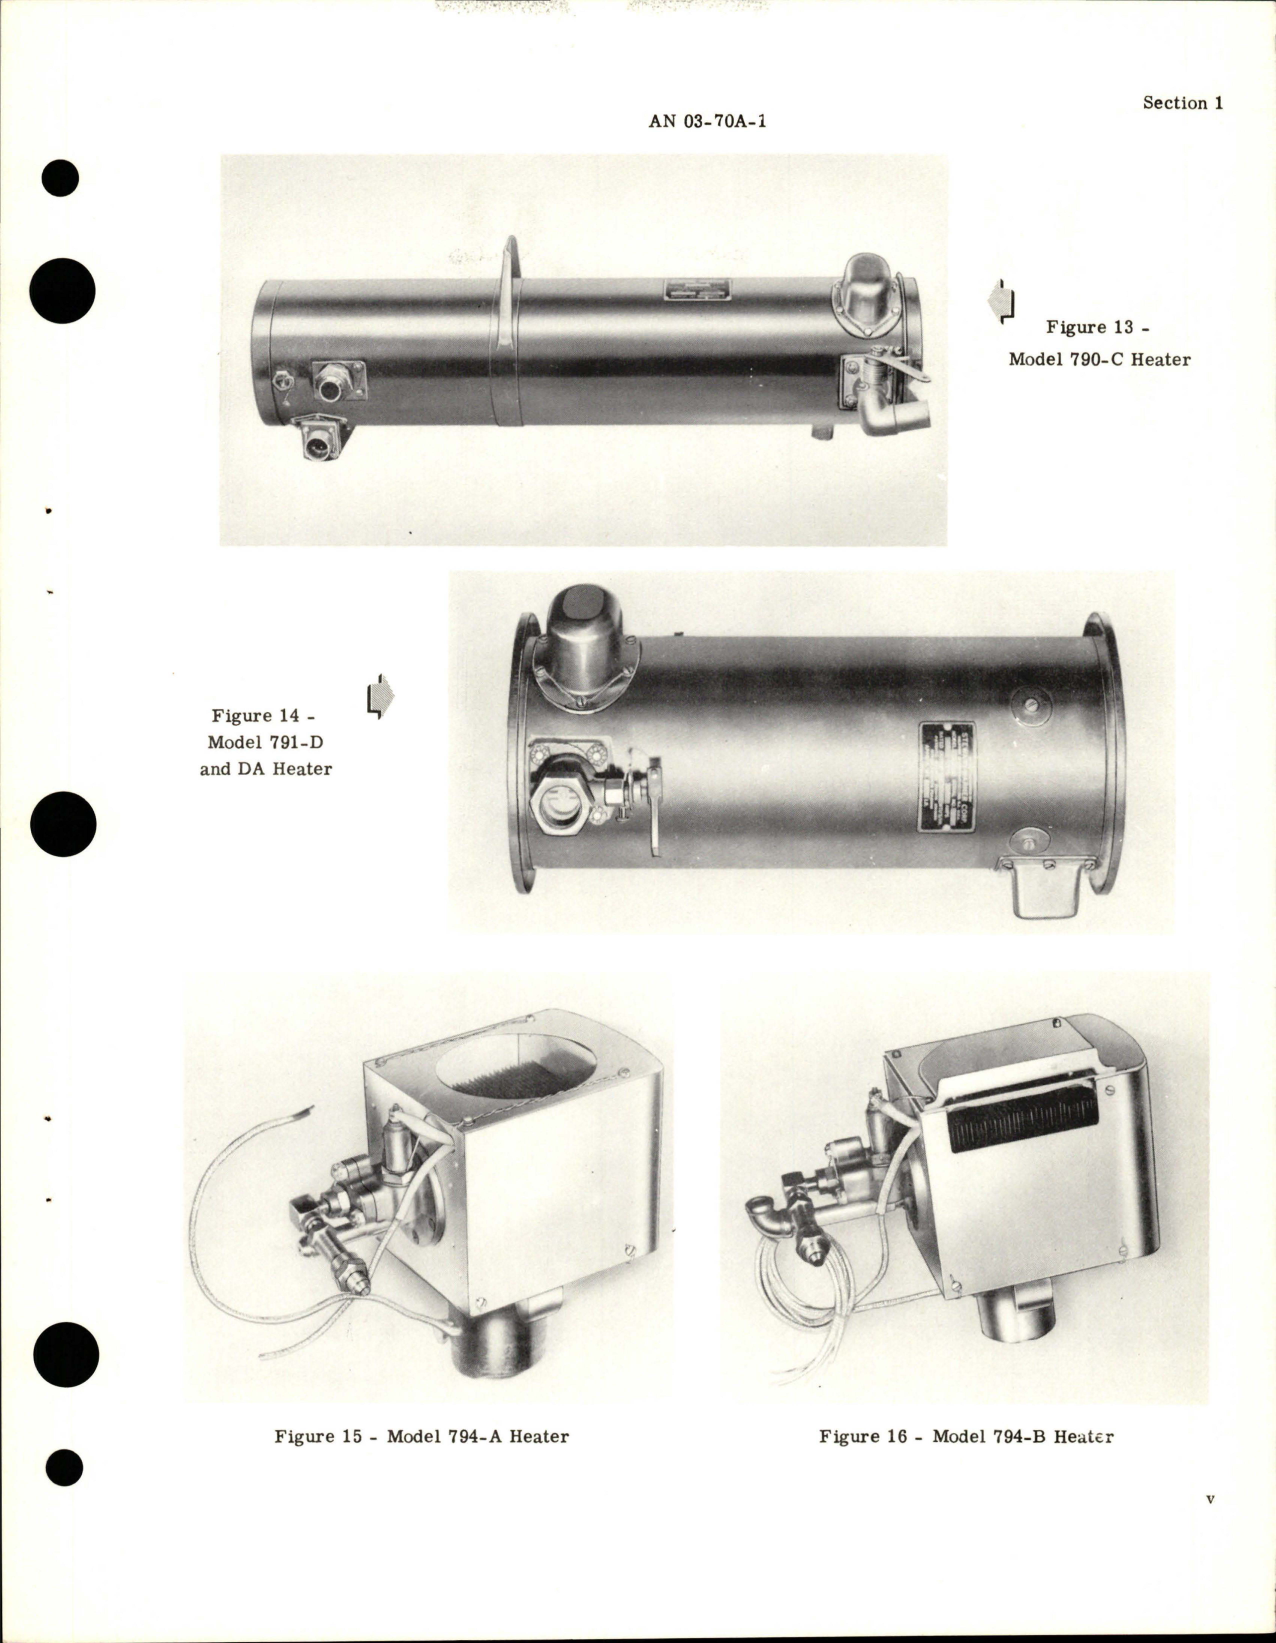 Sample page 7 from AirCorps Library document: Handbook of Instructions with Parts Catalog for Heaters 